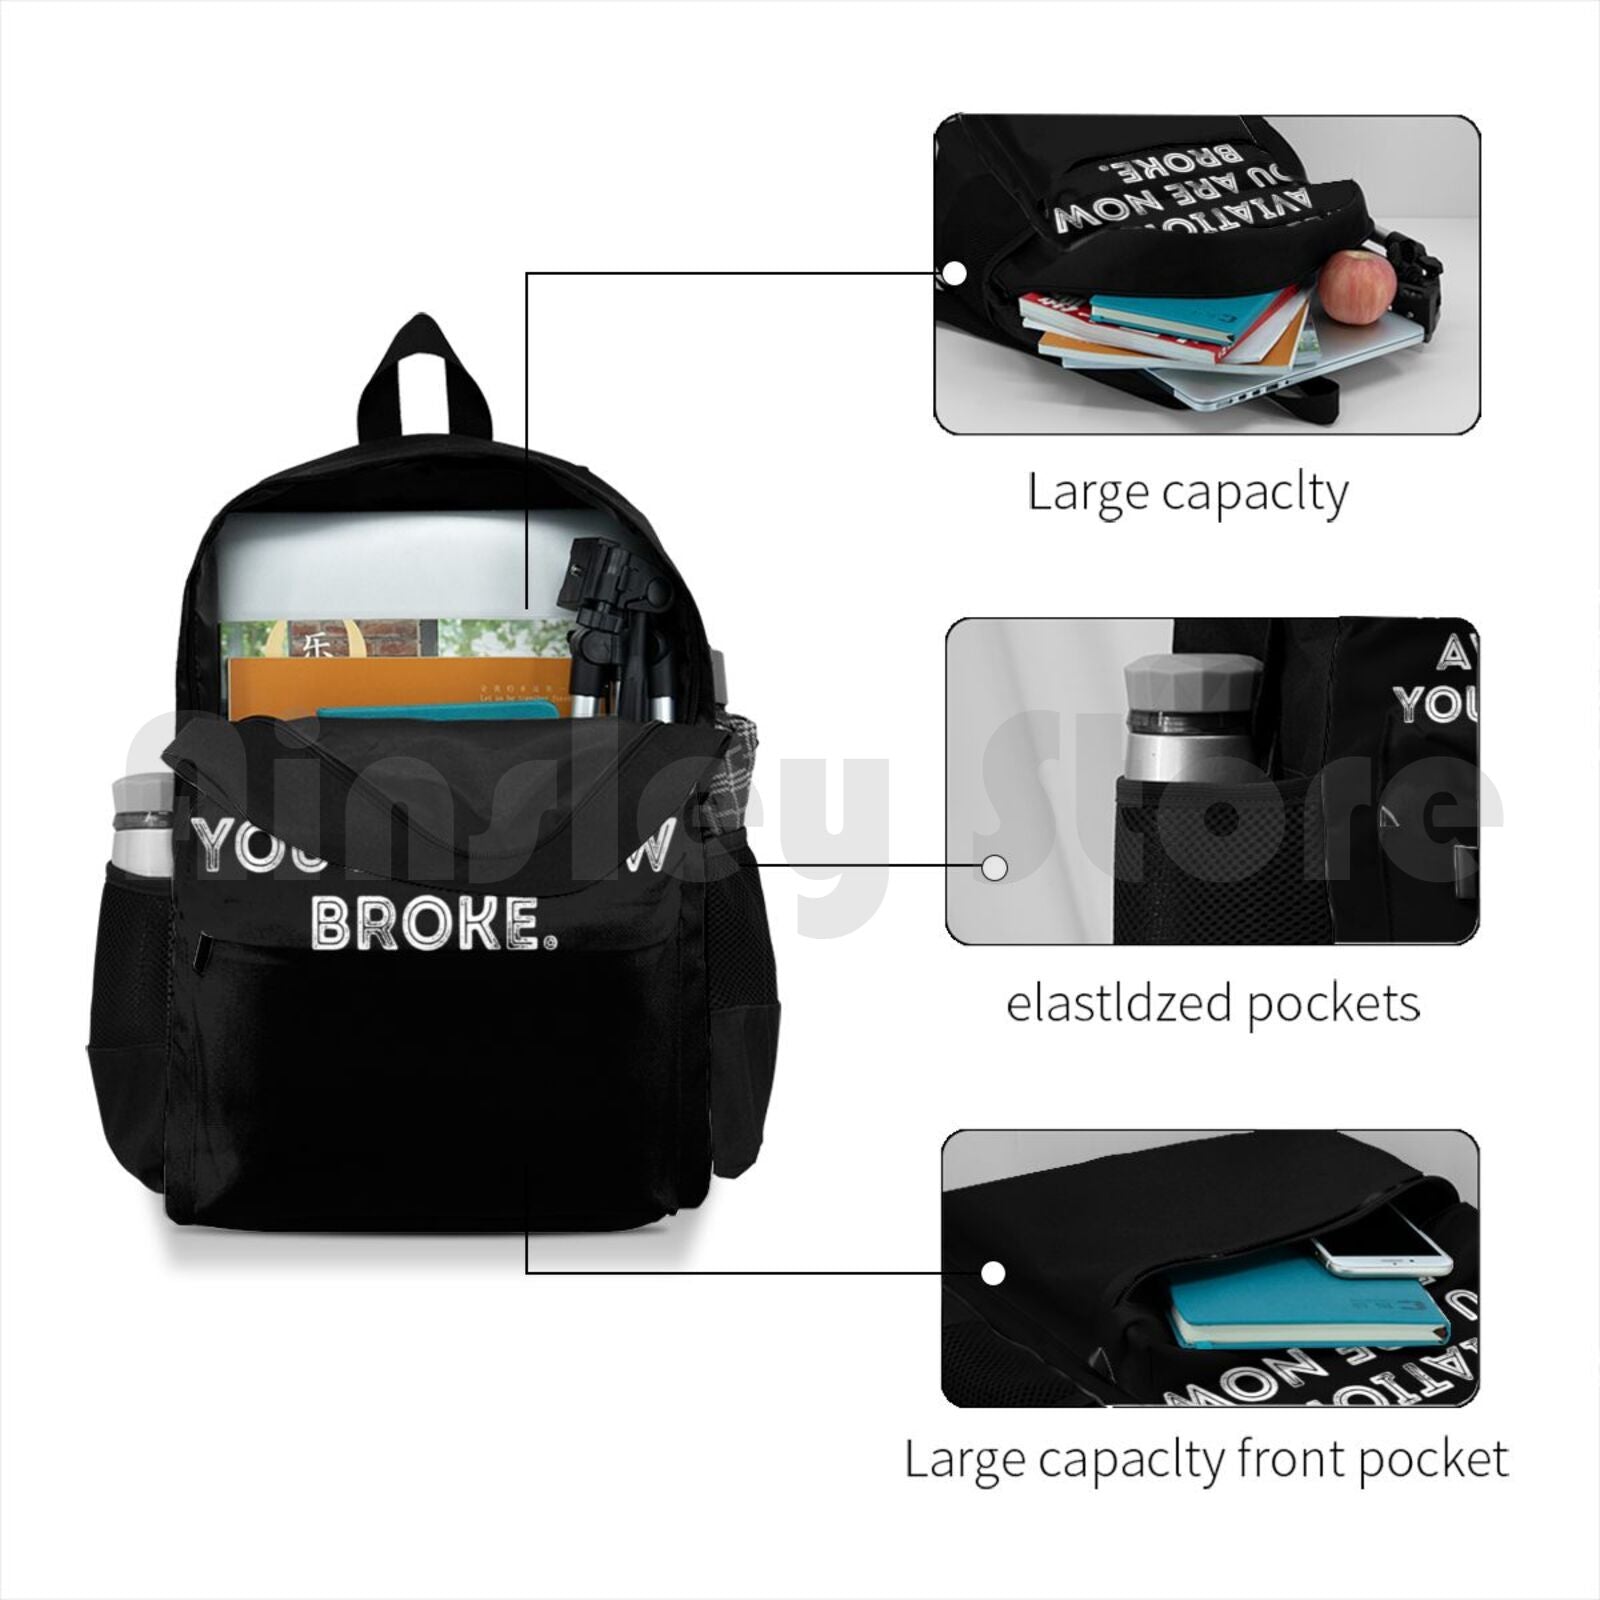 Funny Pilot Joke Welcome To Aviation Outdoor Hiking Backpack Riding Climbing Sports Bag Aerospace Airplane Lover Aviation Funny